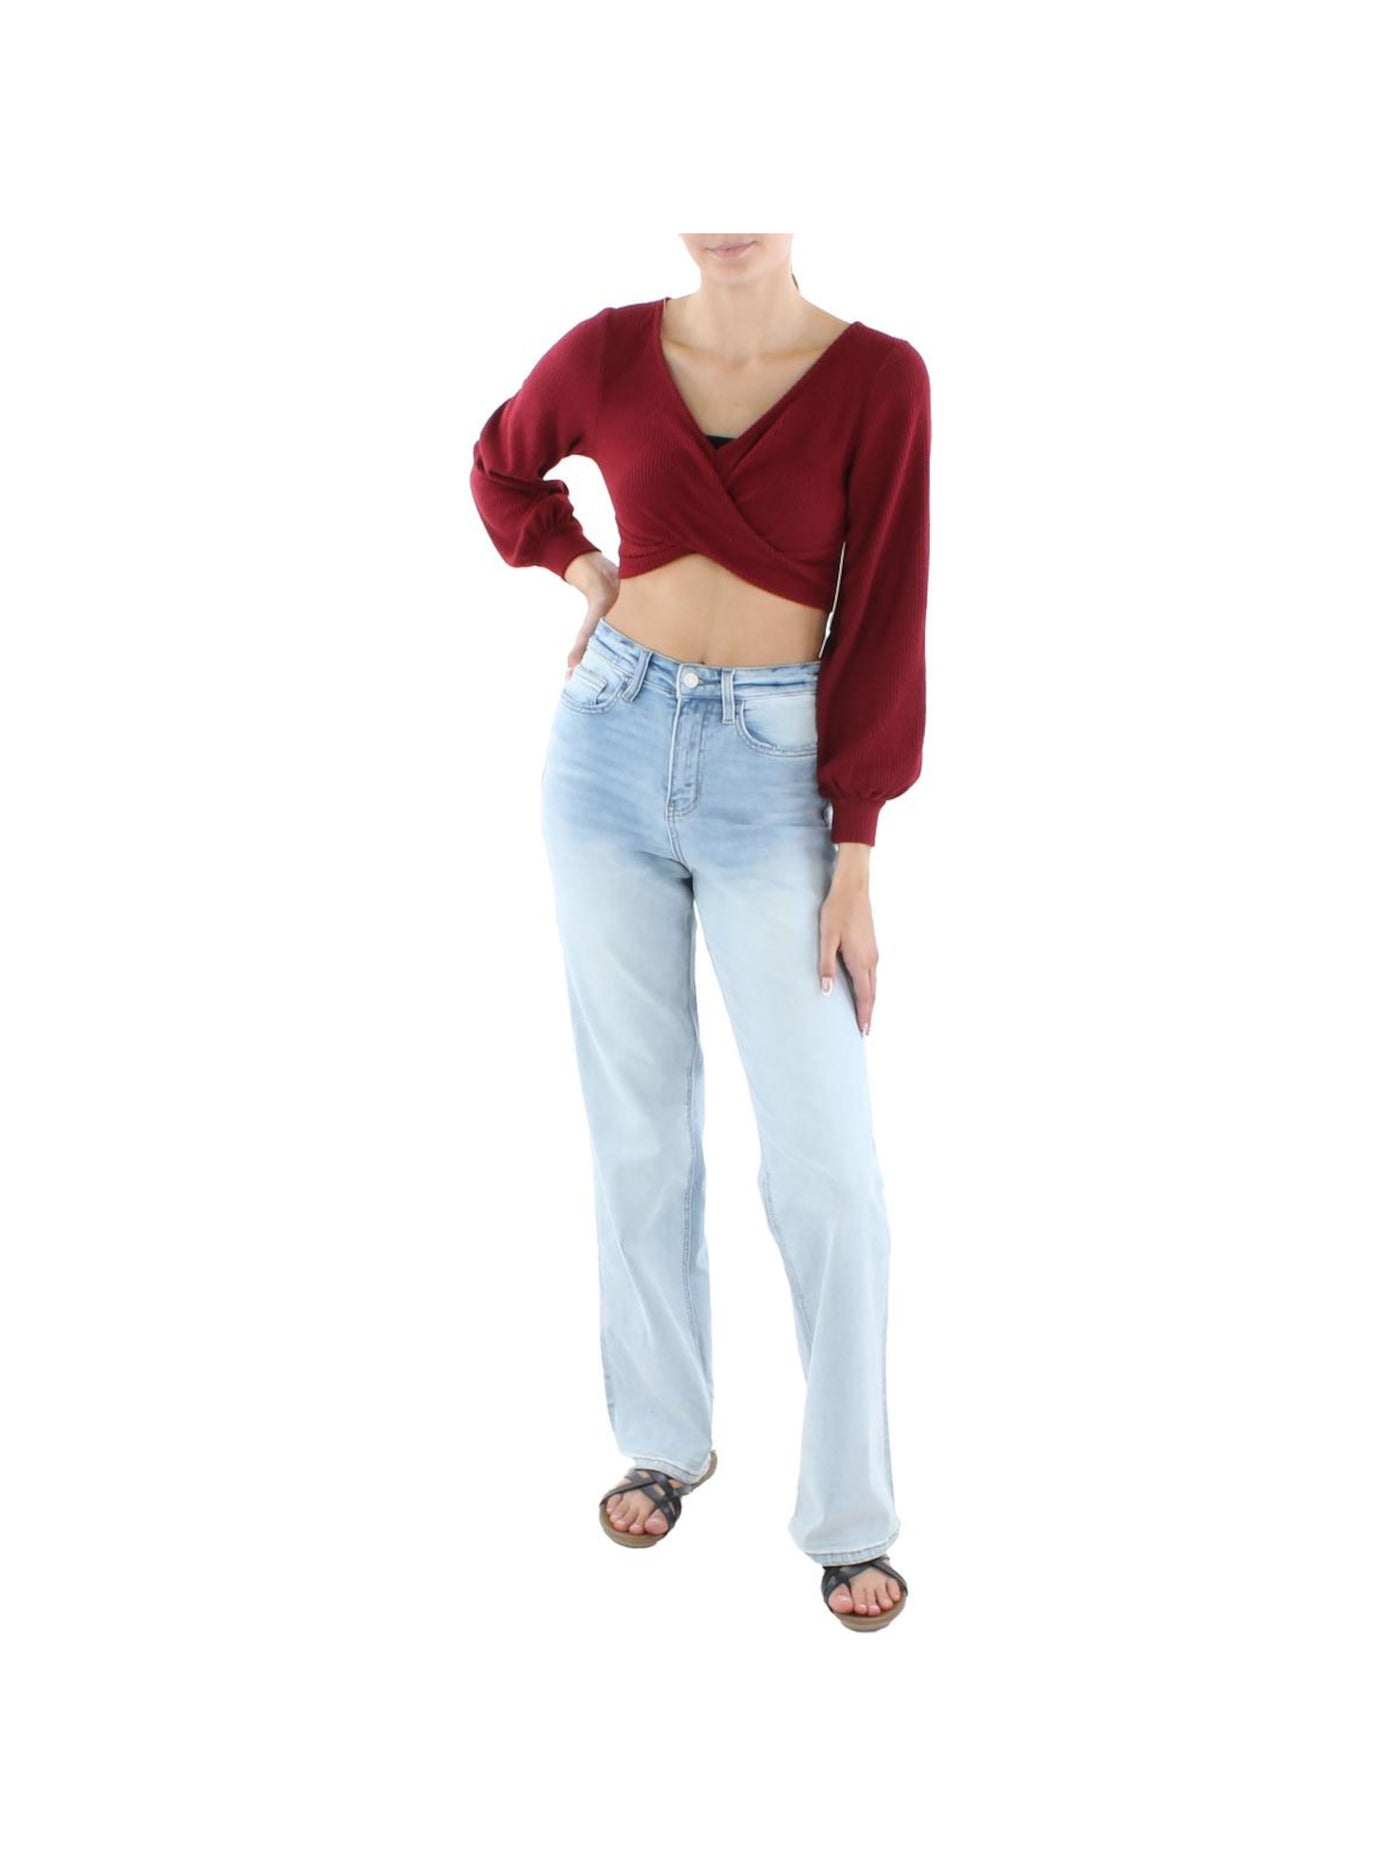 ALMOST FAMOUS Womens Red Ribbed Twist Front Sheer Balloon Sleeve V Neck Crop Top Sweater Juniors M